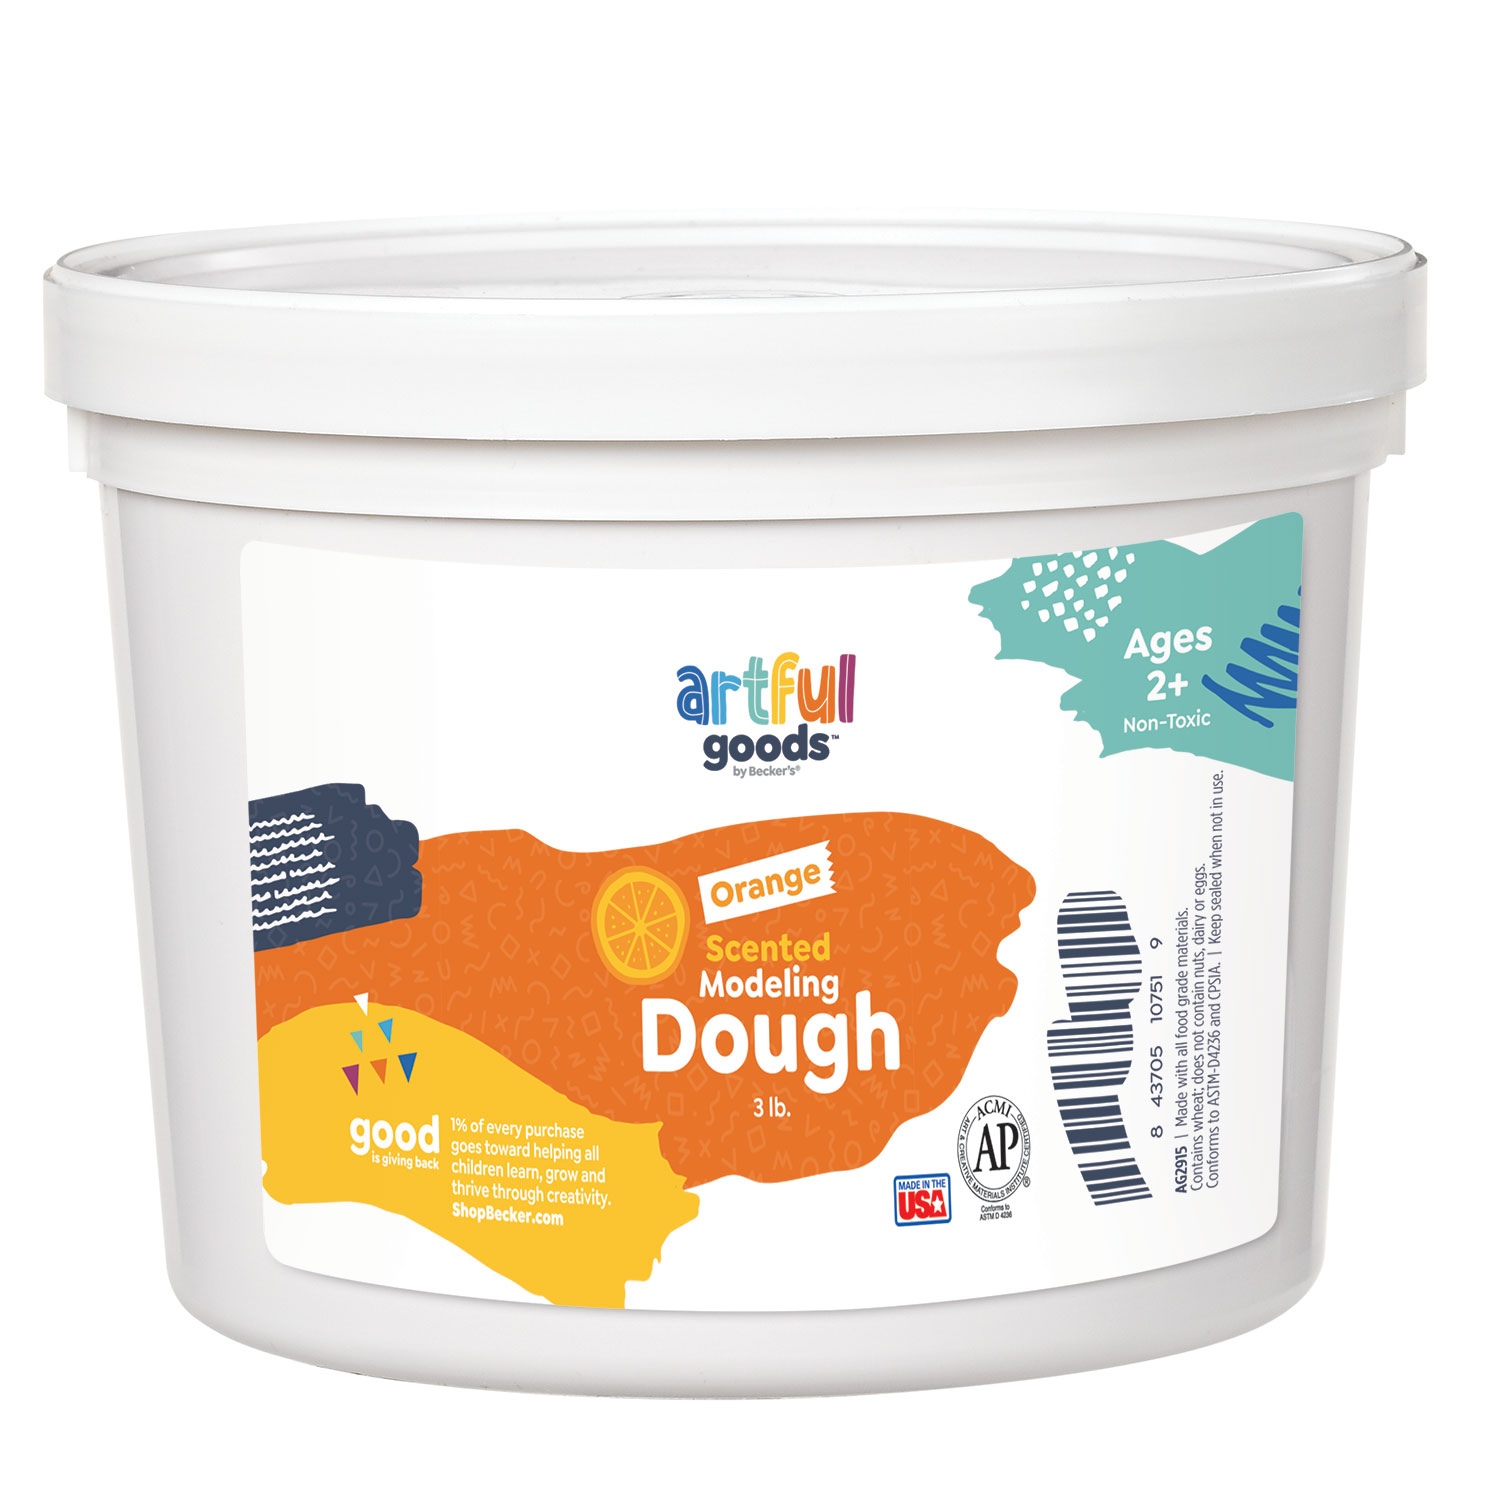 Artful Goods® Scented Modeling Dough